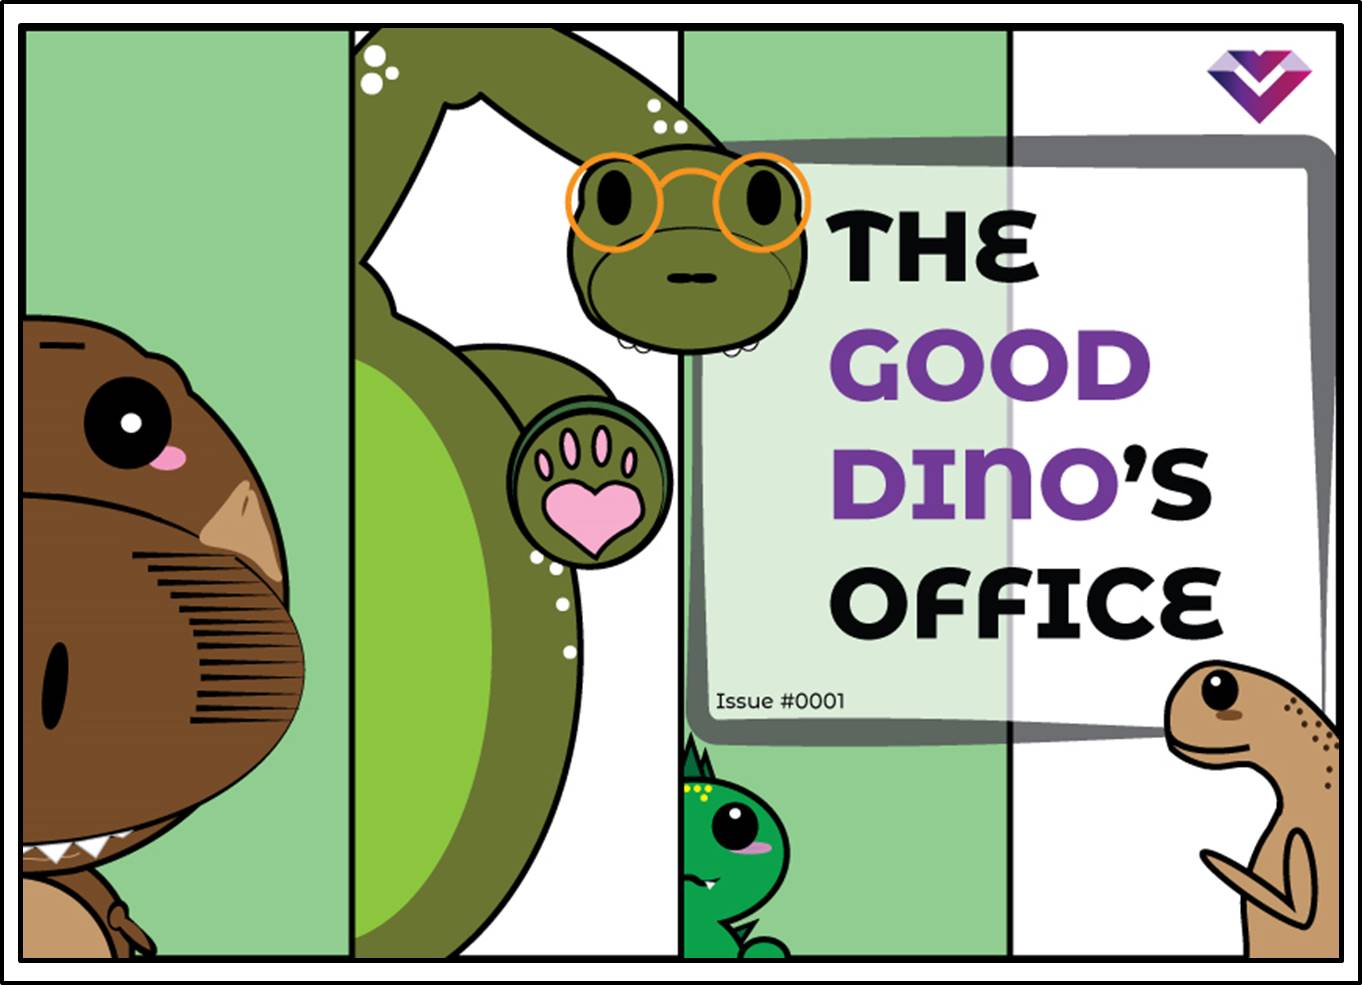 You are currently viewing The Good Dino’s Office: Giving Presentations